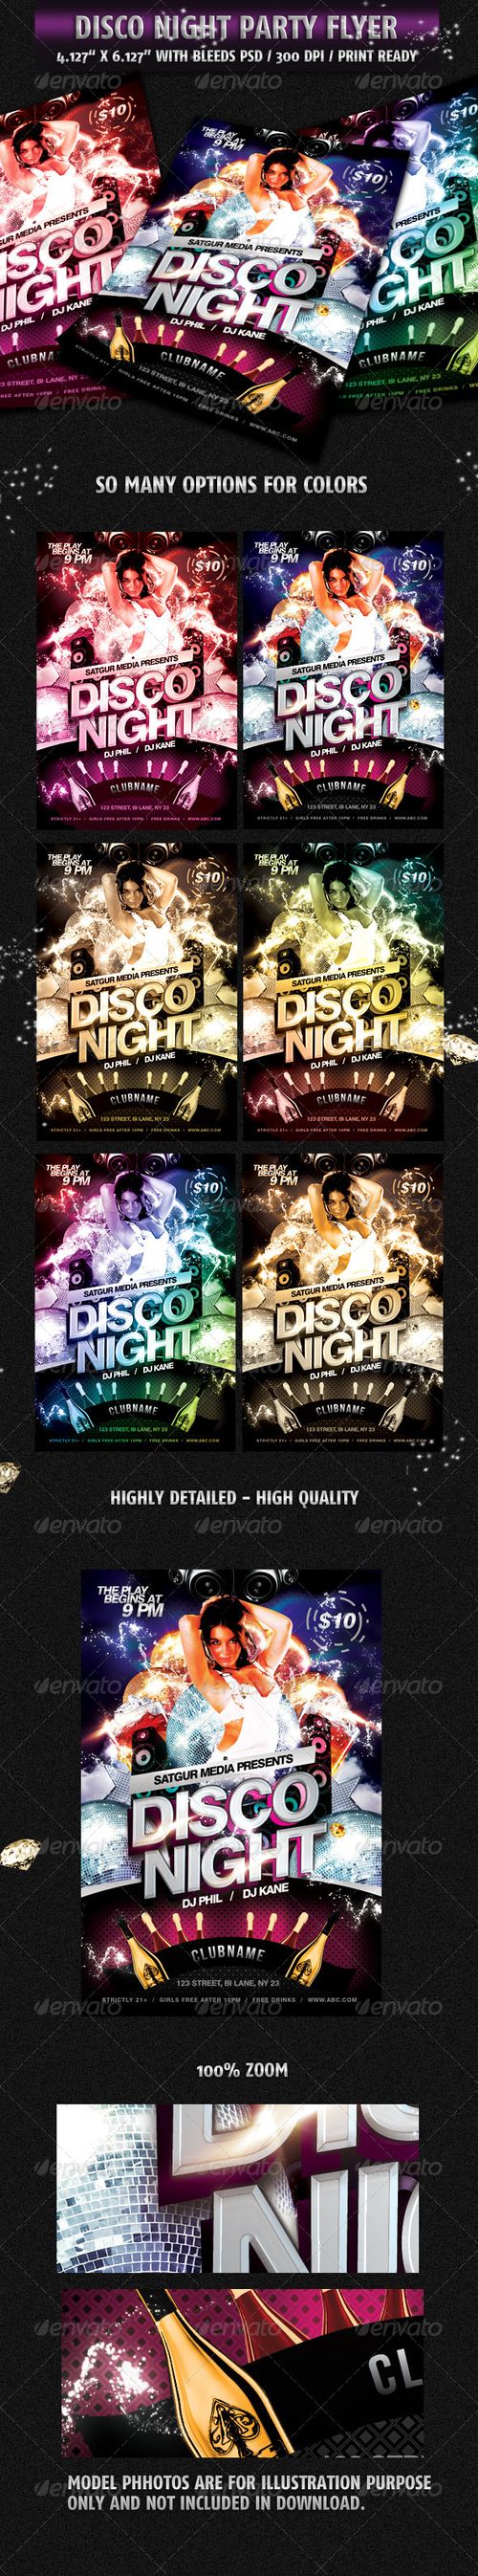 Disco Night Party Flyer